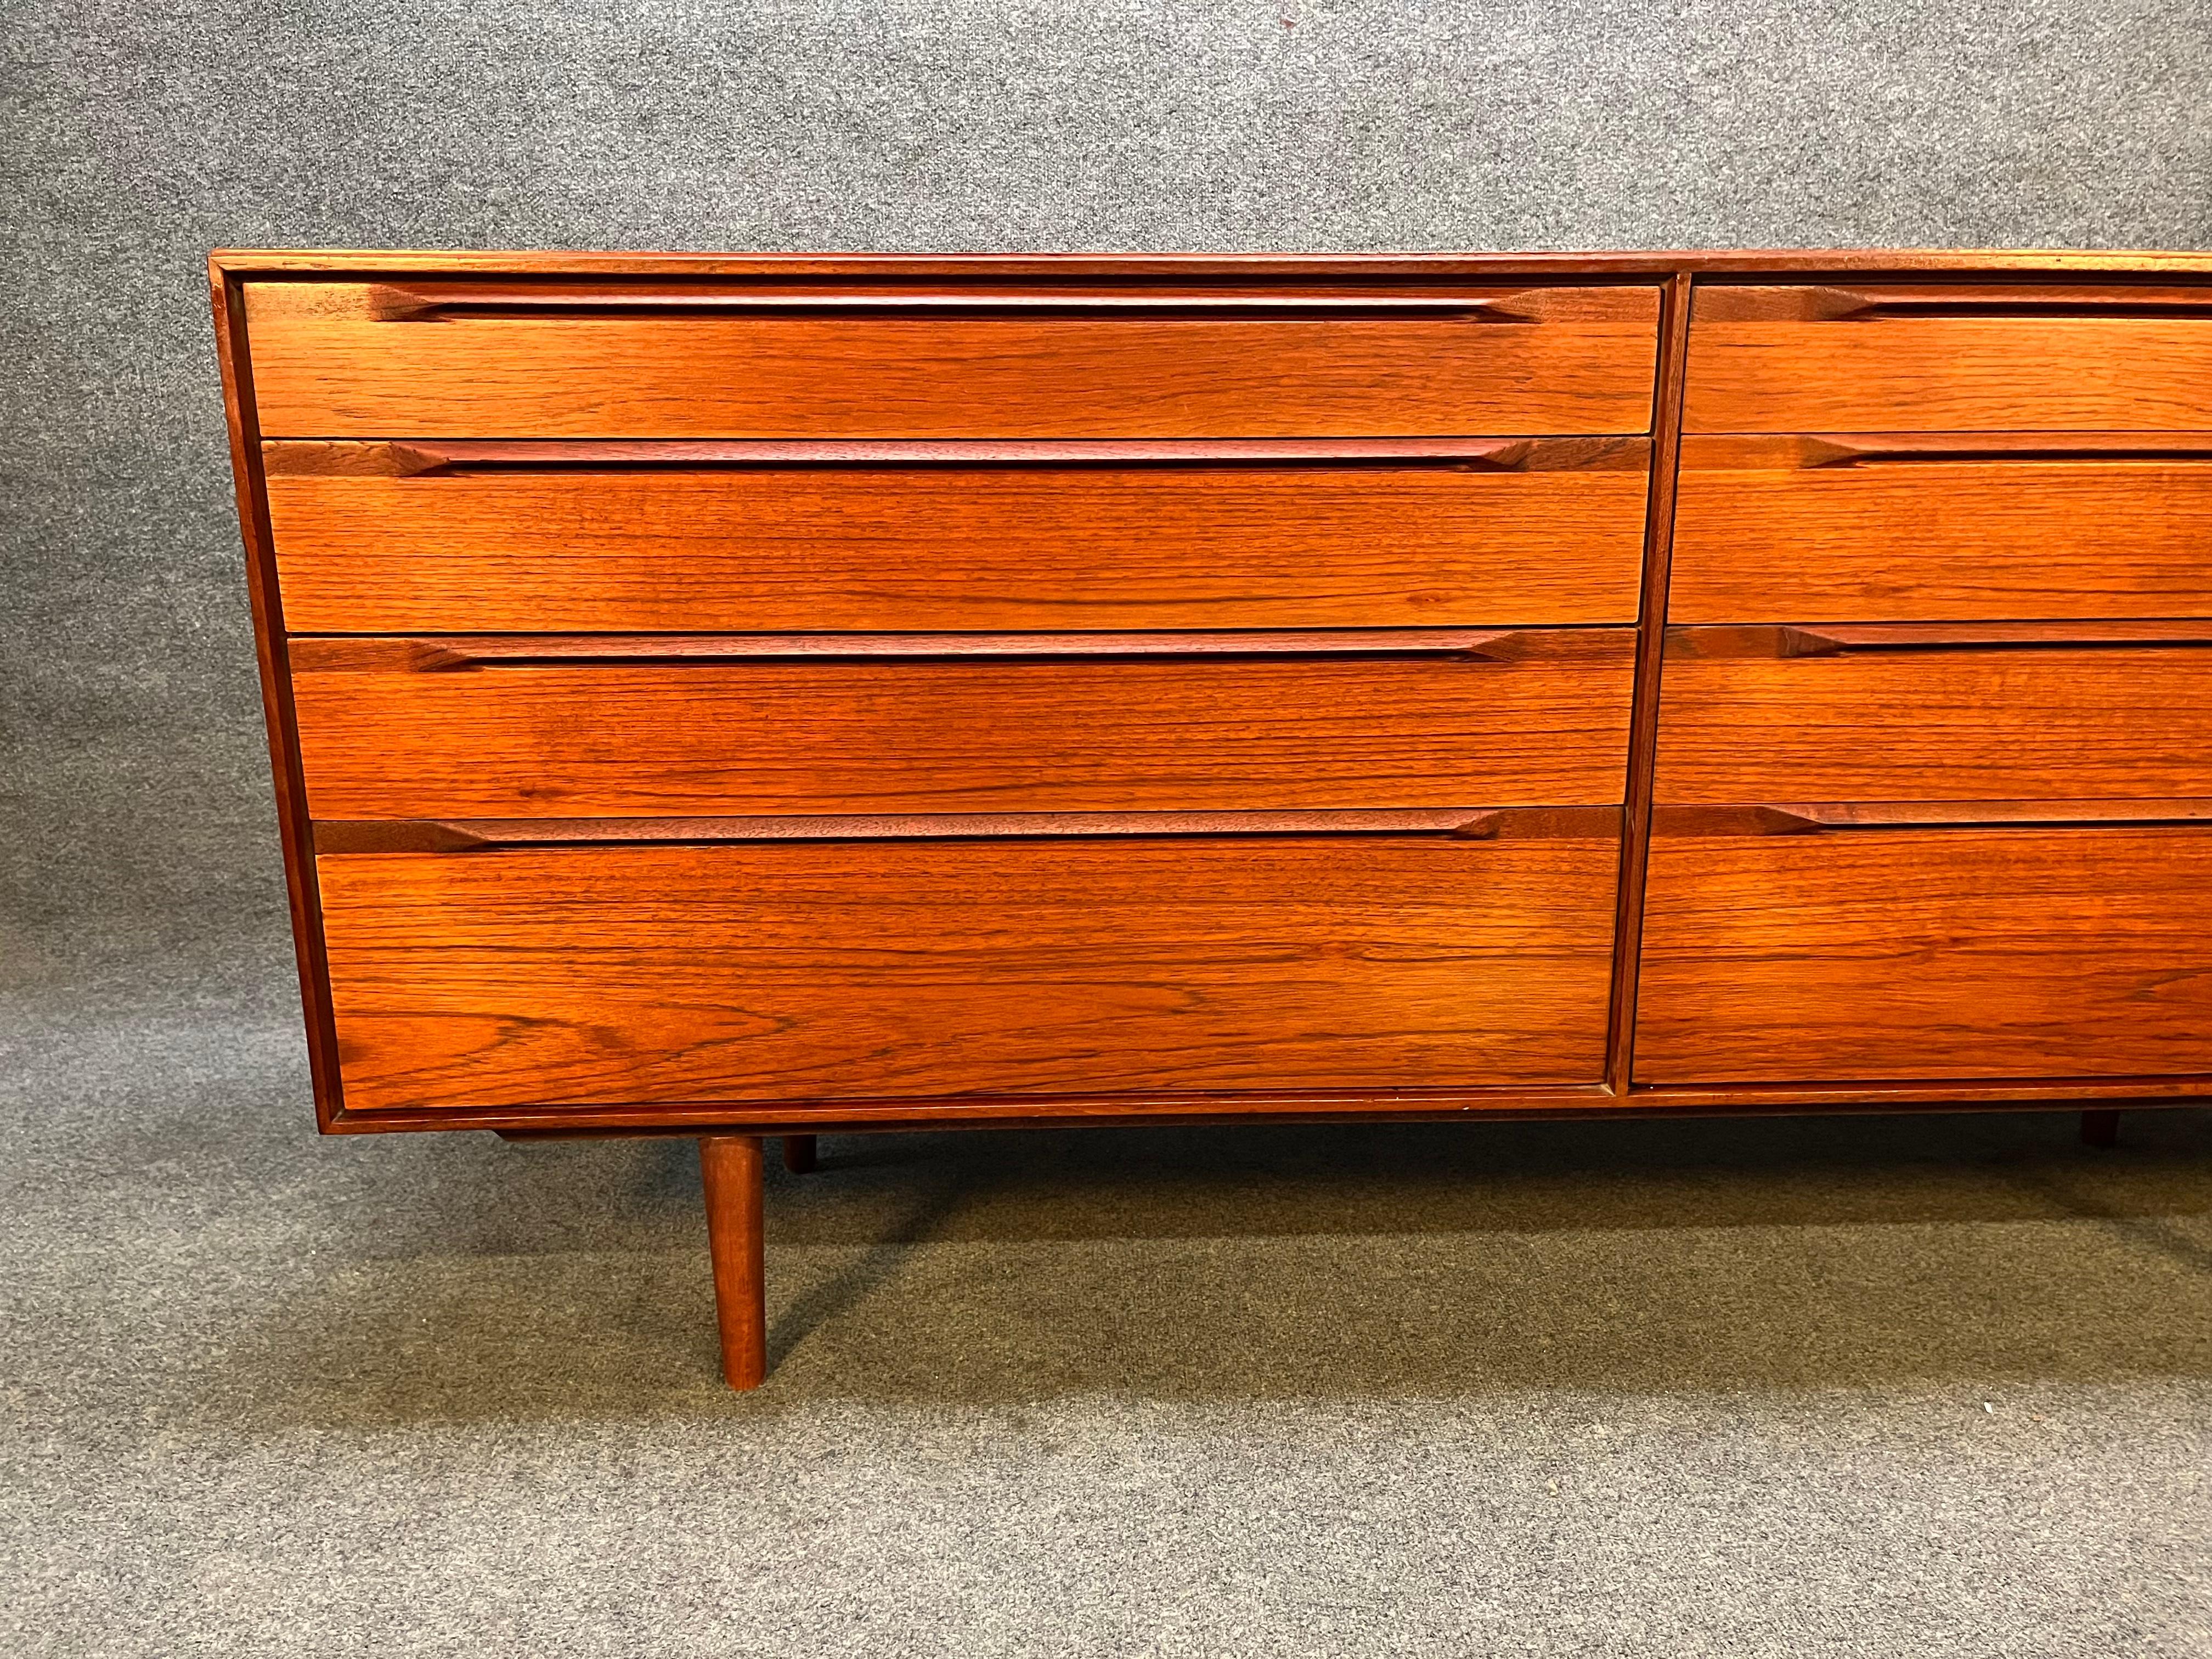 You are viewing a fantastic Danish Teak 8-drawer double dresser, designed by IB Kofod Larsen for Fredericia Mobelfabrik c1960s. This handsome piece features warm teak veneers throughout, six shallower drawers on top, two deeper drawers at bottom